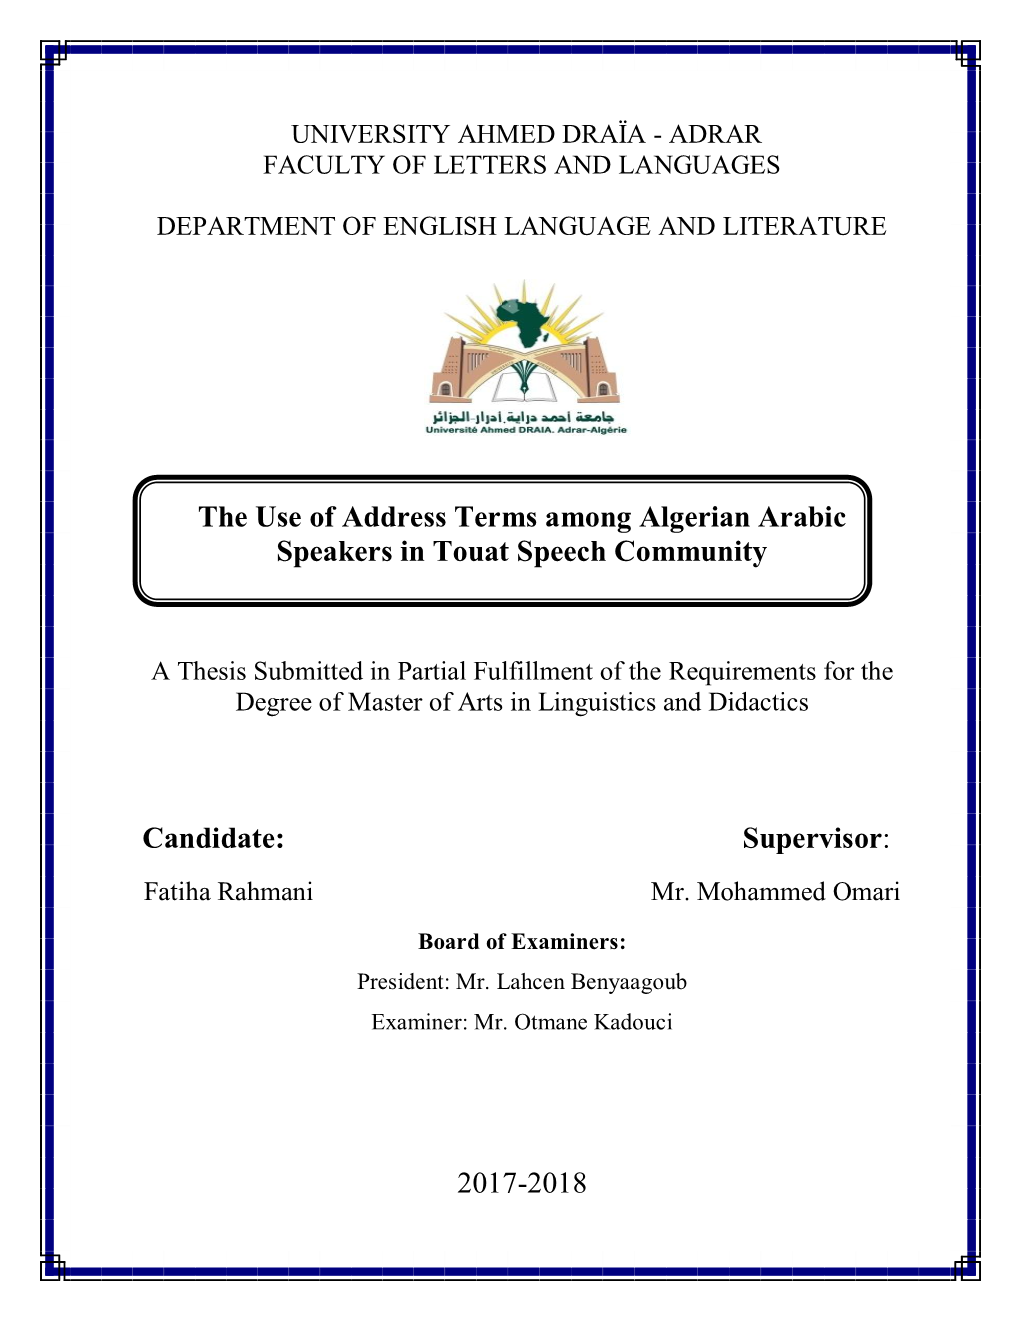 The Use of Address Terms Among Algerian Arabic Speakers in Touat Speech Community